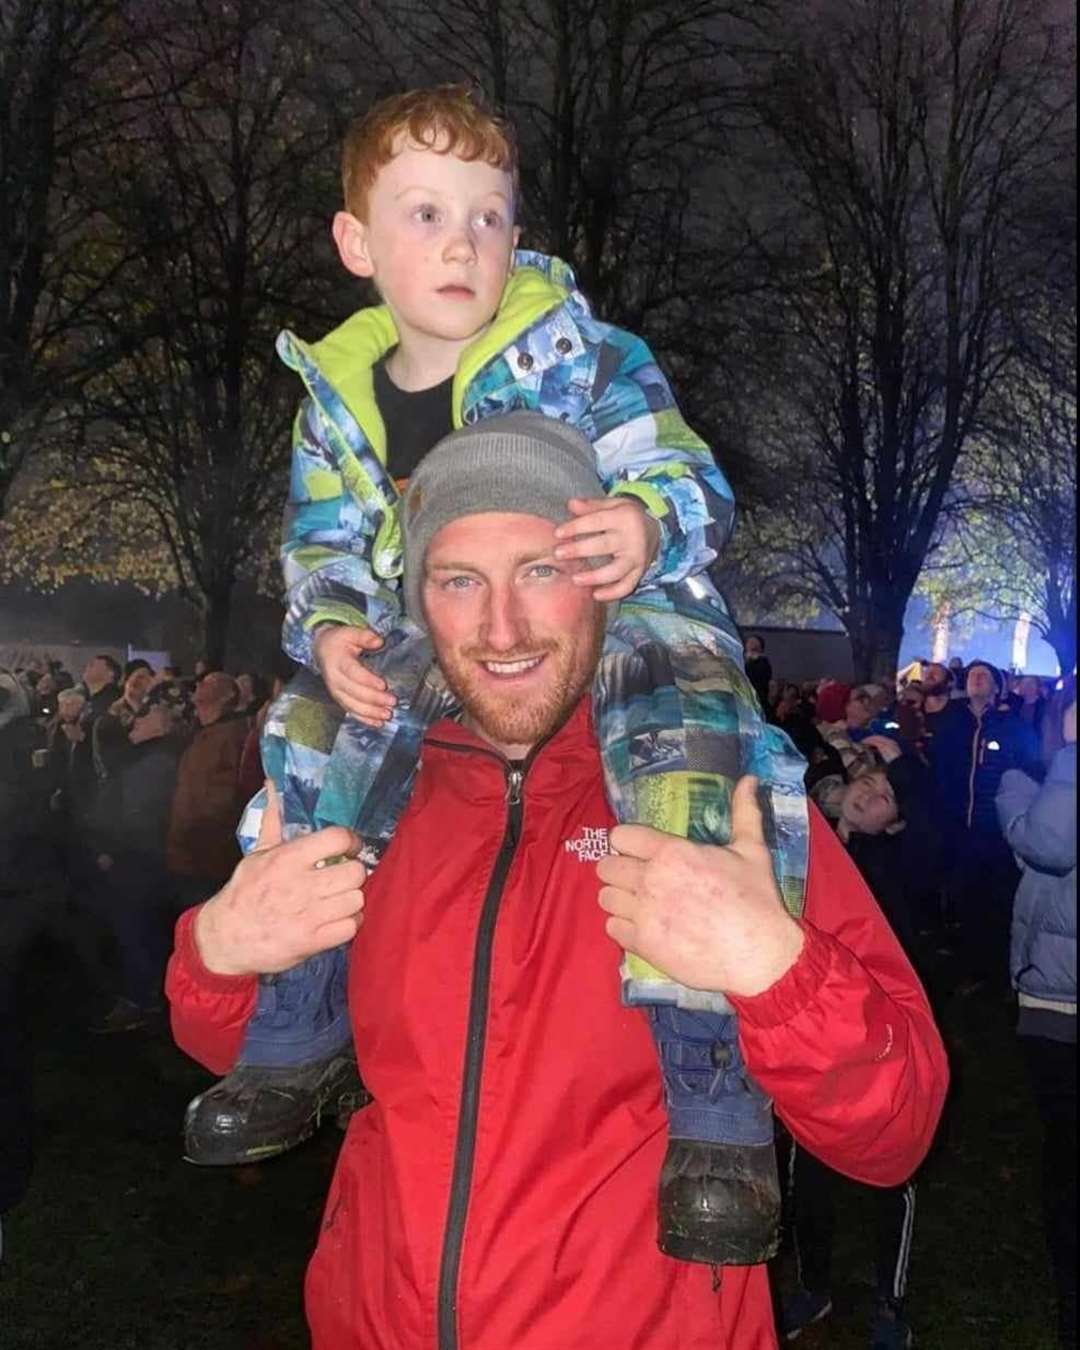 Darren Gemmel attended with his son, Logie Primary School pupil Alfie (5) who thinks Forres is lucky to always have such "mega-good" fireworks.